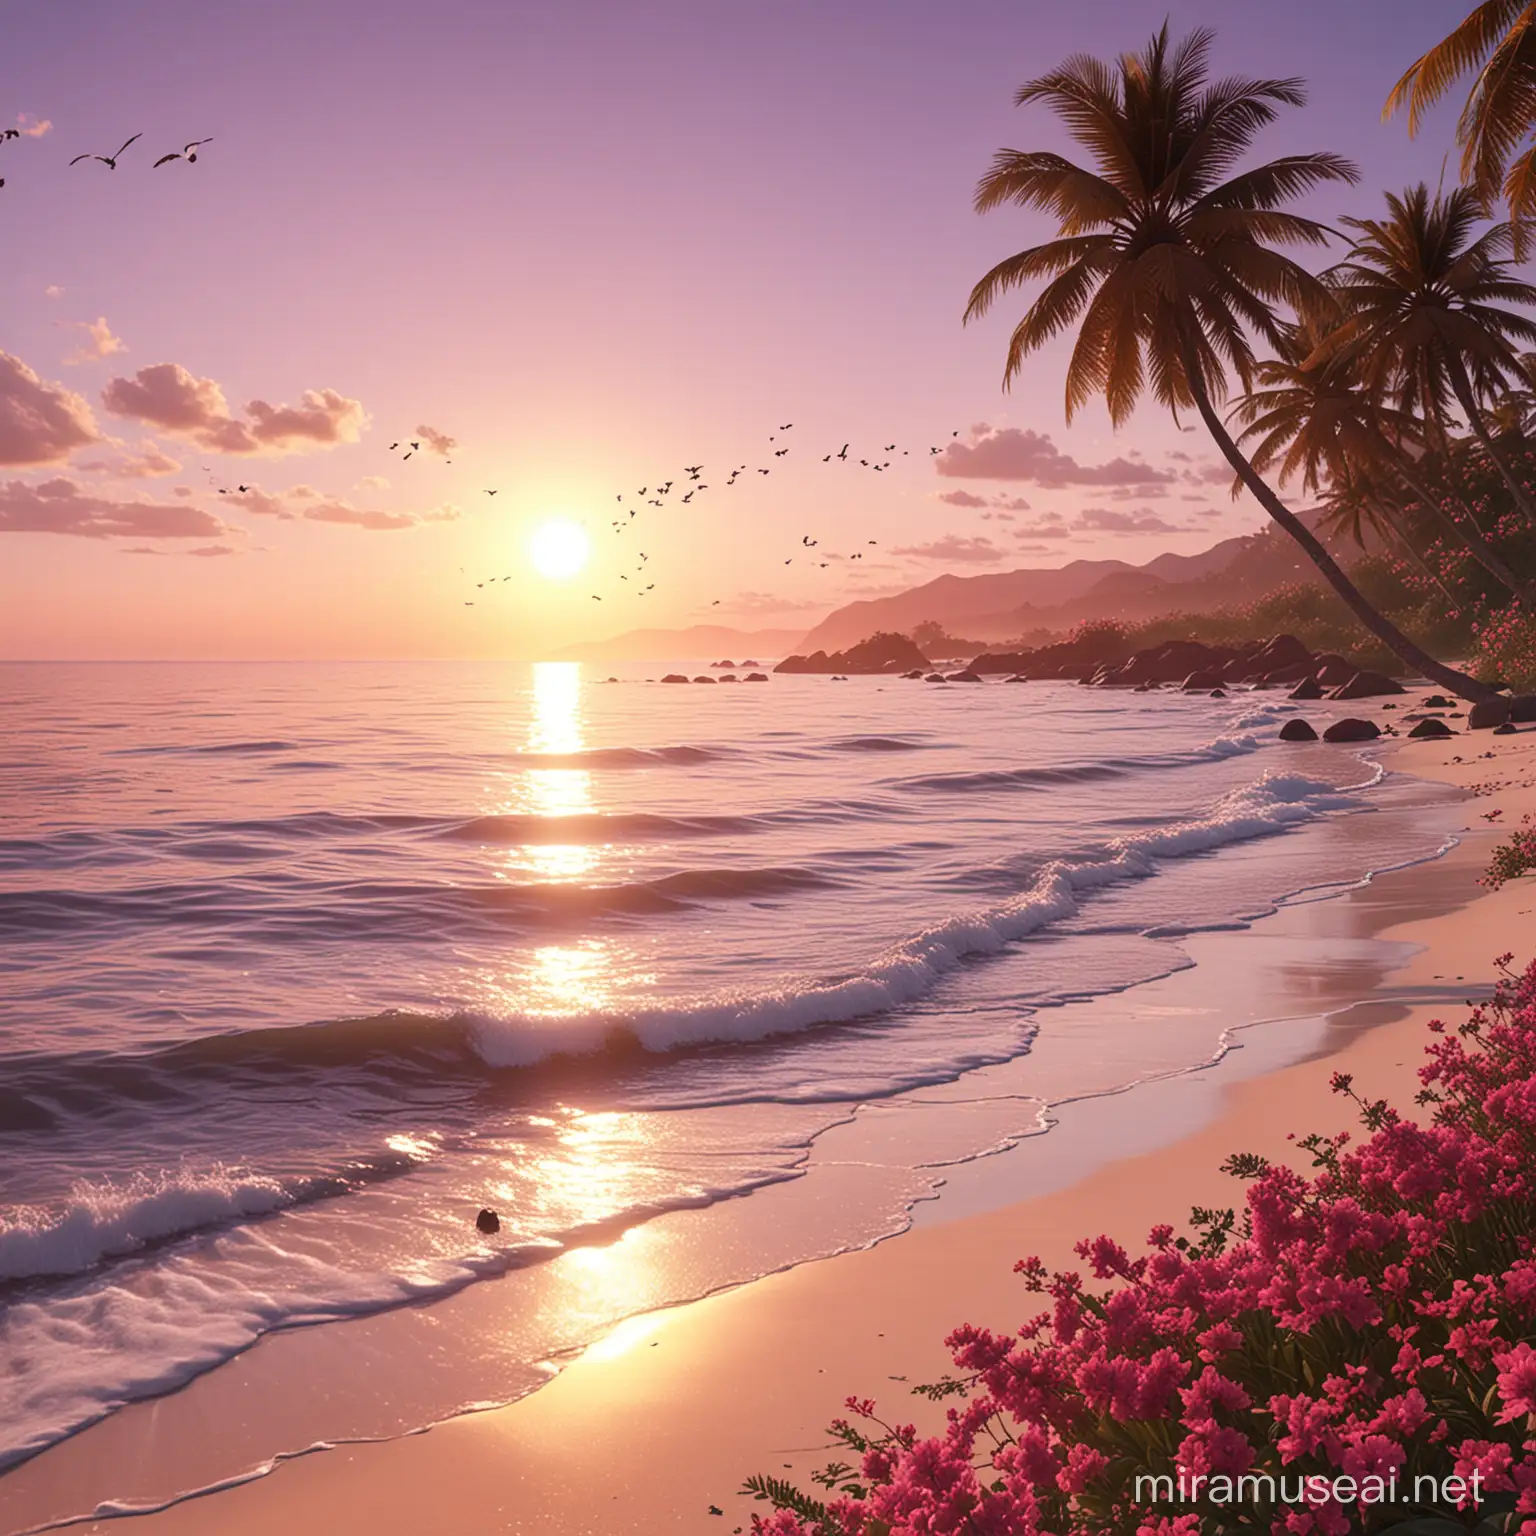 Create a 3D illustration of a tropical beach scene at sunset. Include two prominent palm trees in the foreground with vibrant green leaves, bending slightly towards each other. Intersperse the foliage with bright pink tropical flowers. The beach should have soft white sand with a subtle pink hue reflecting the sunset, and footprints leading to the water, indicating a recently visited spot. The ocean is calm with gentle waves lapping onto the shore, and the water reflects the breathtaking gradient of sunset colors from warm purple to soft pink. The sky is clear with a few wisps of clouds, and birds can be seen in the distance. The entire scene should exude a serene and inviting atmosphere, perfect for a paradise getaway, 32k render, hyperrealistic, detailed.